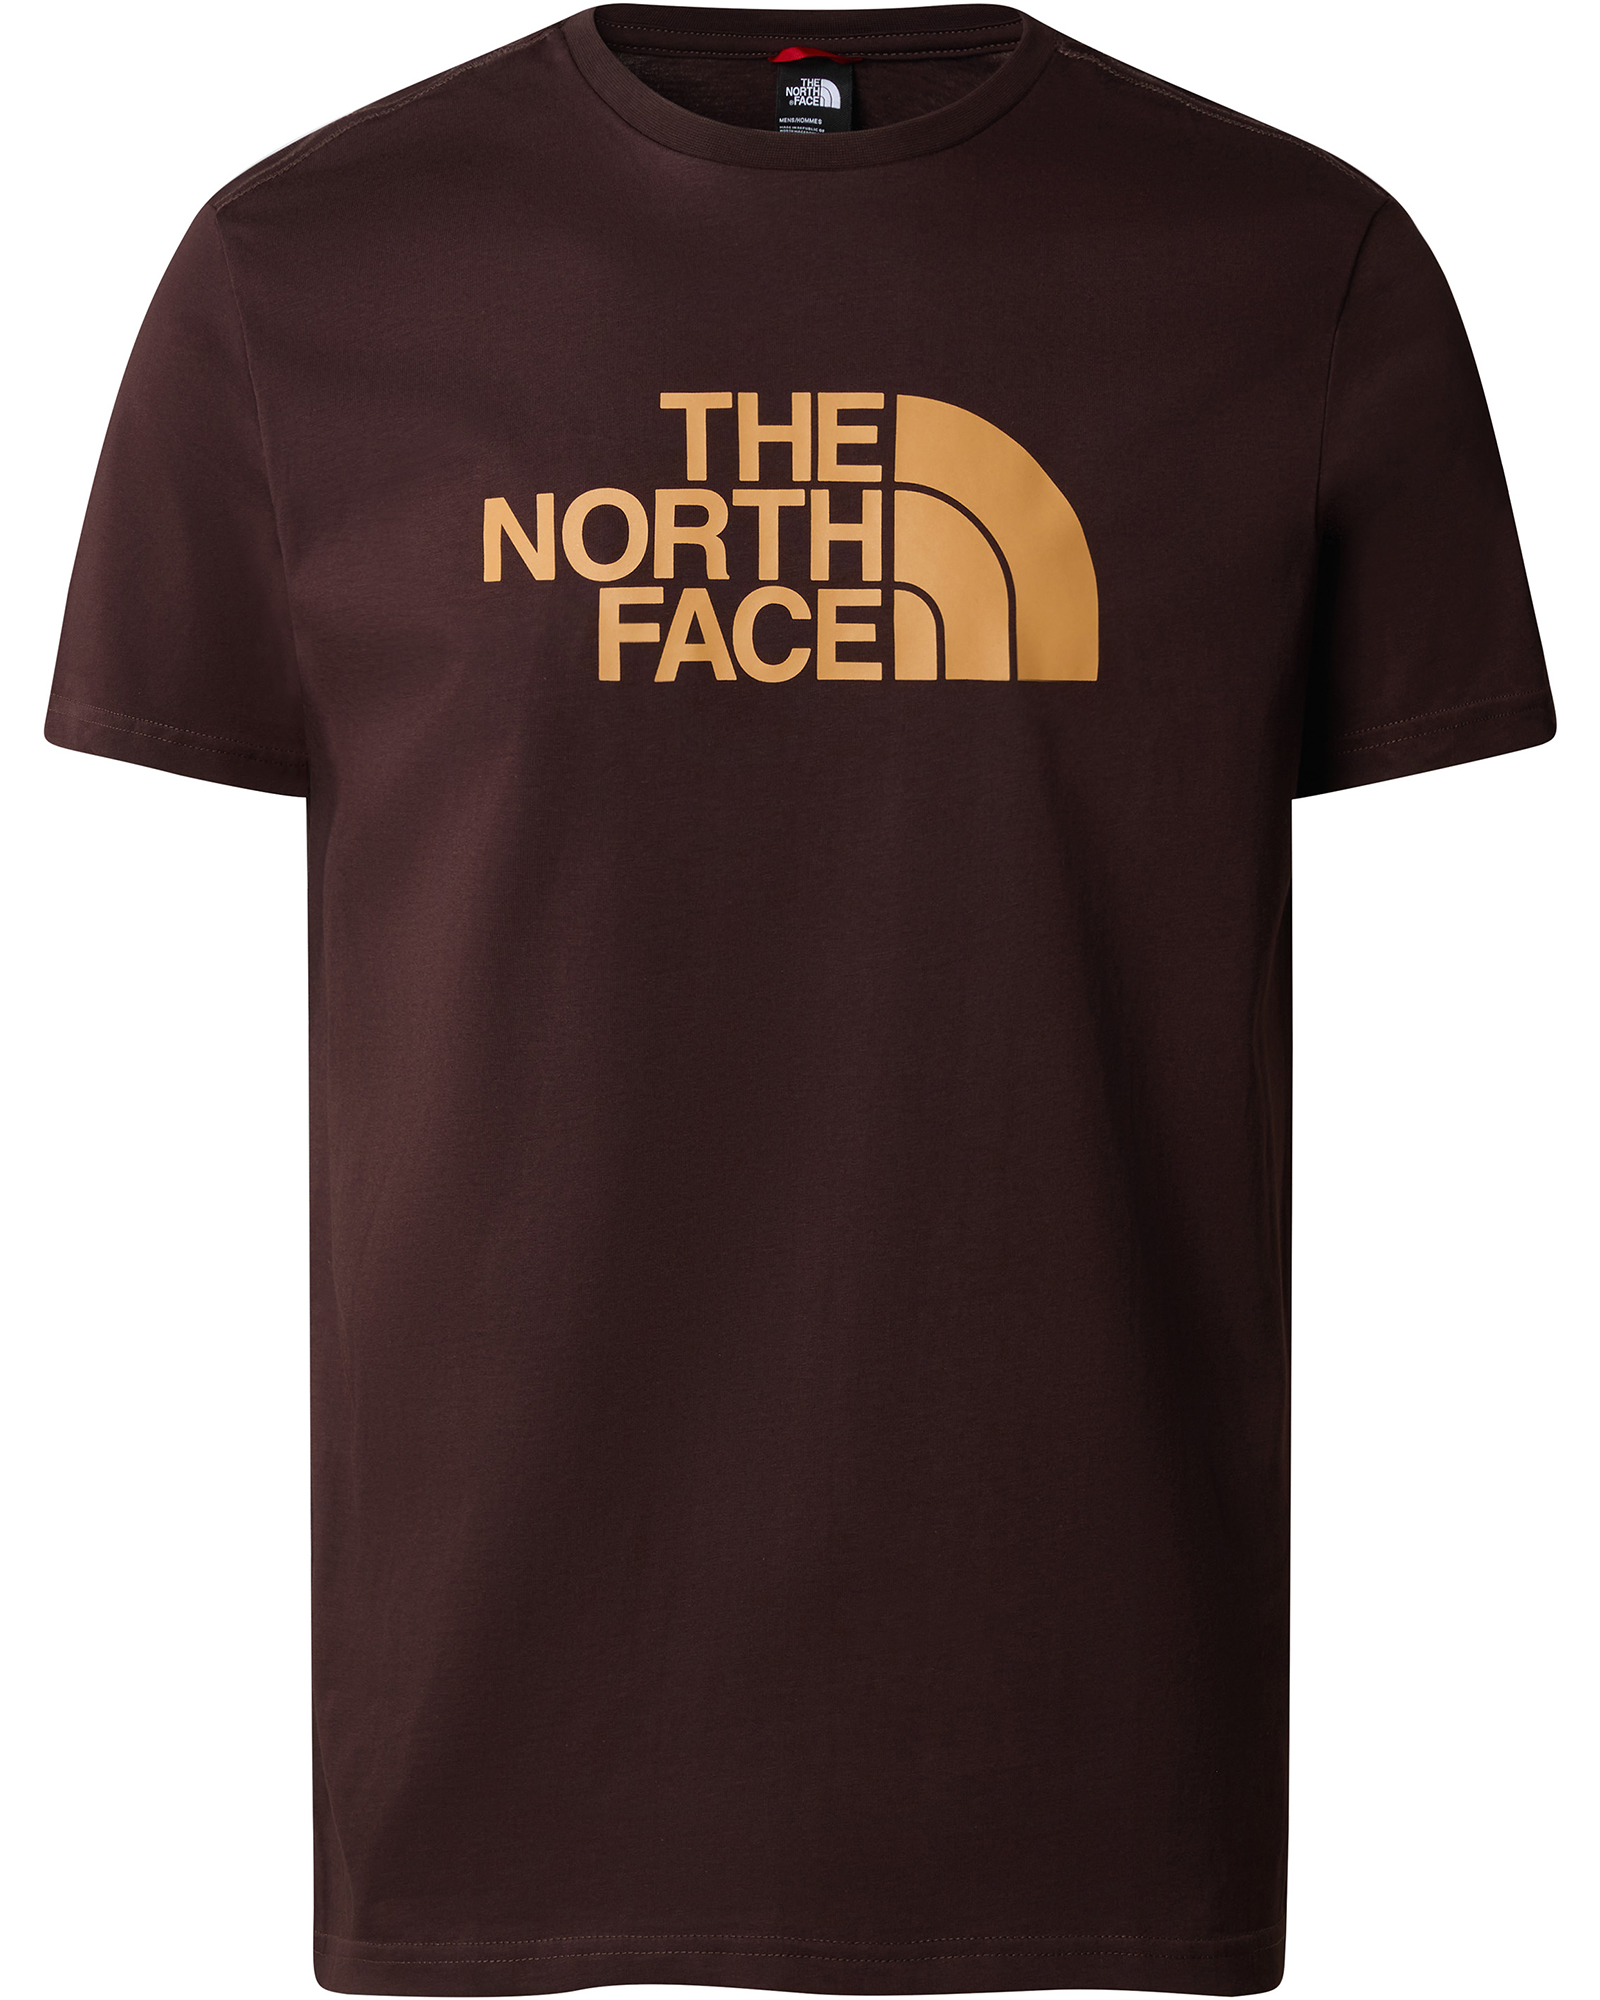 The North Face Easy Men’s T Shirt - Coal Brown-Almond Butter XS